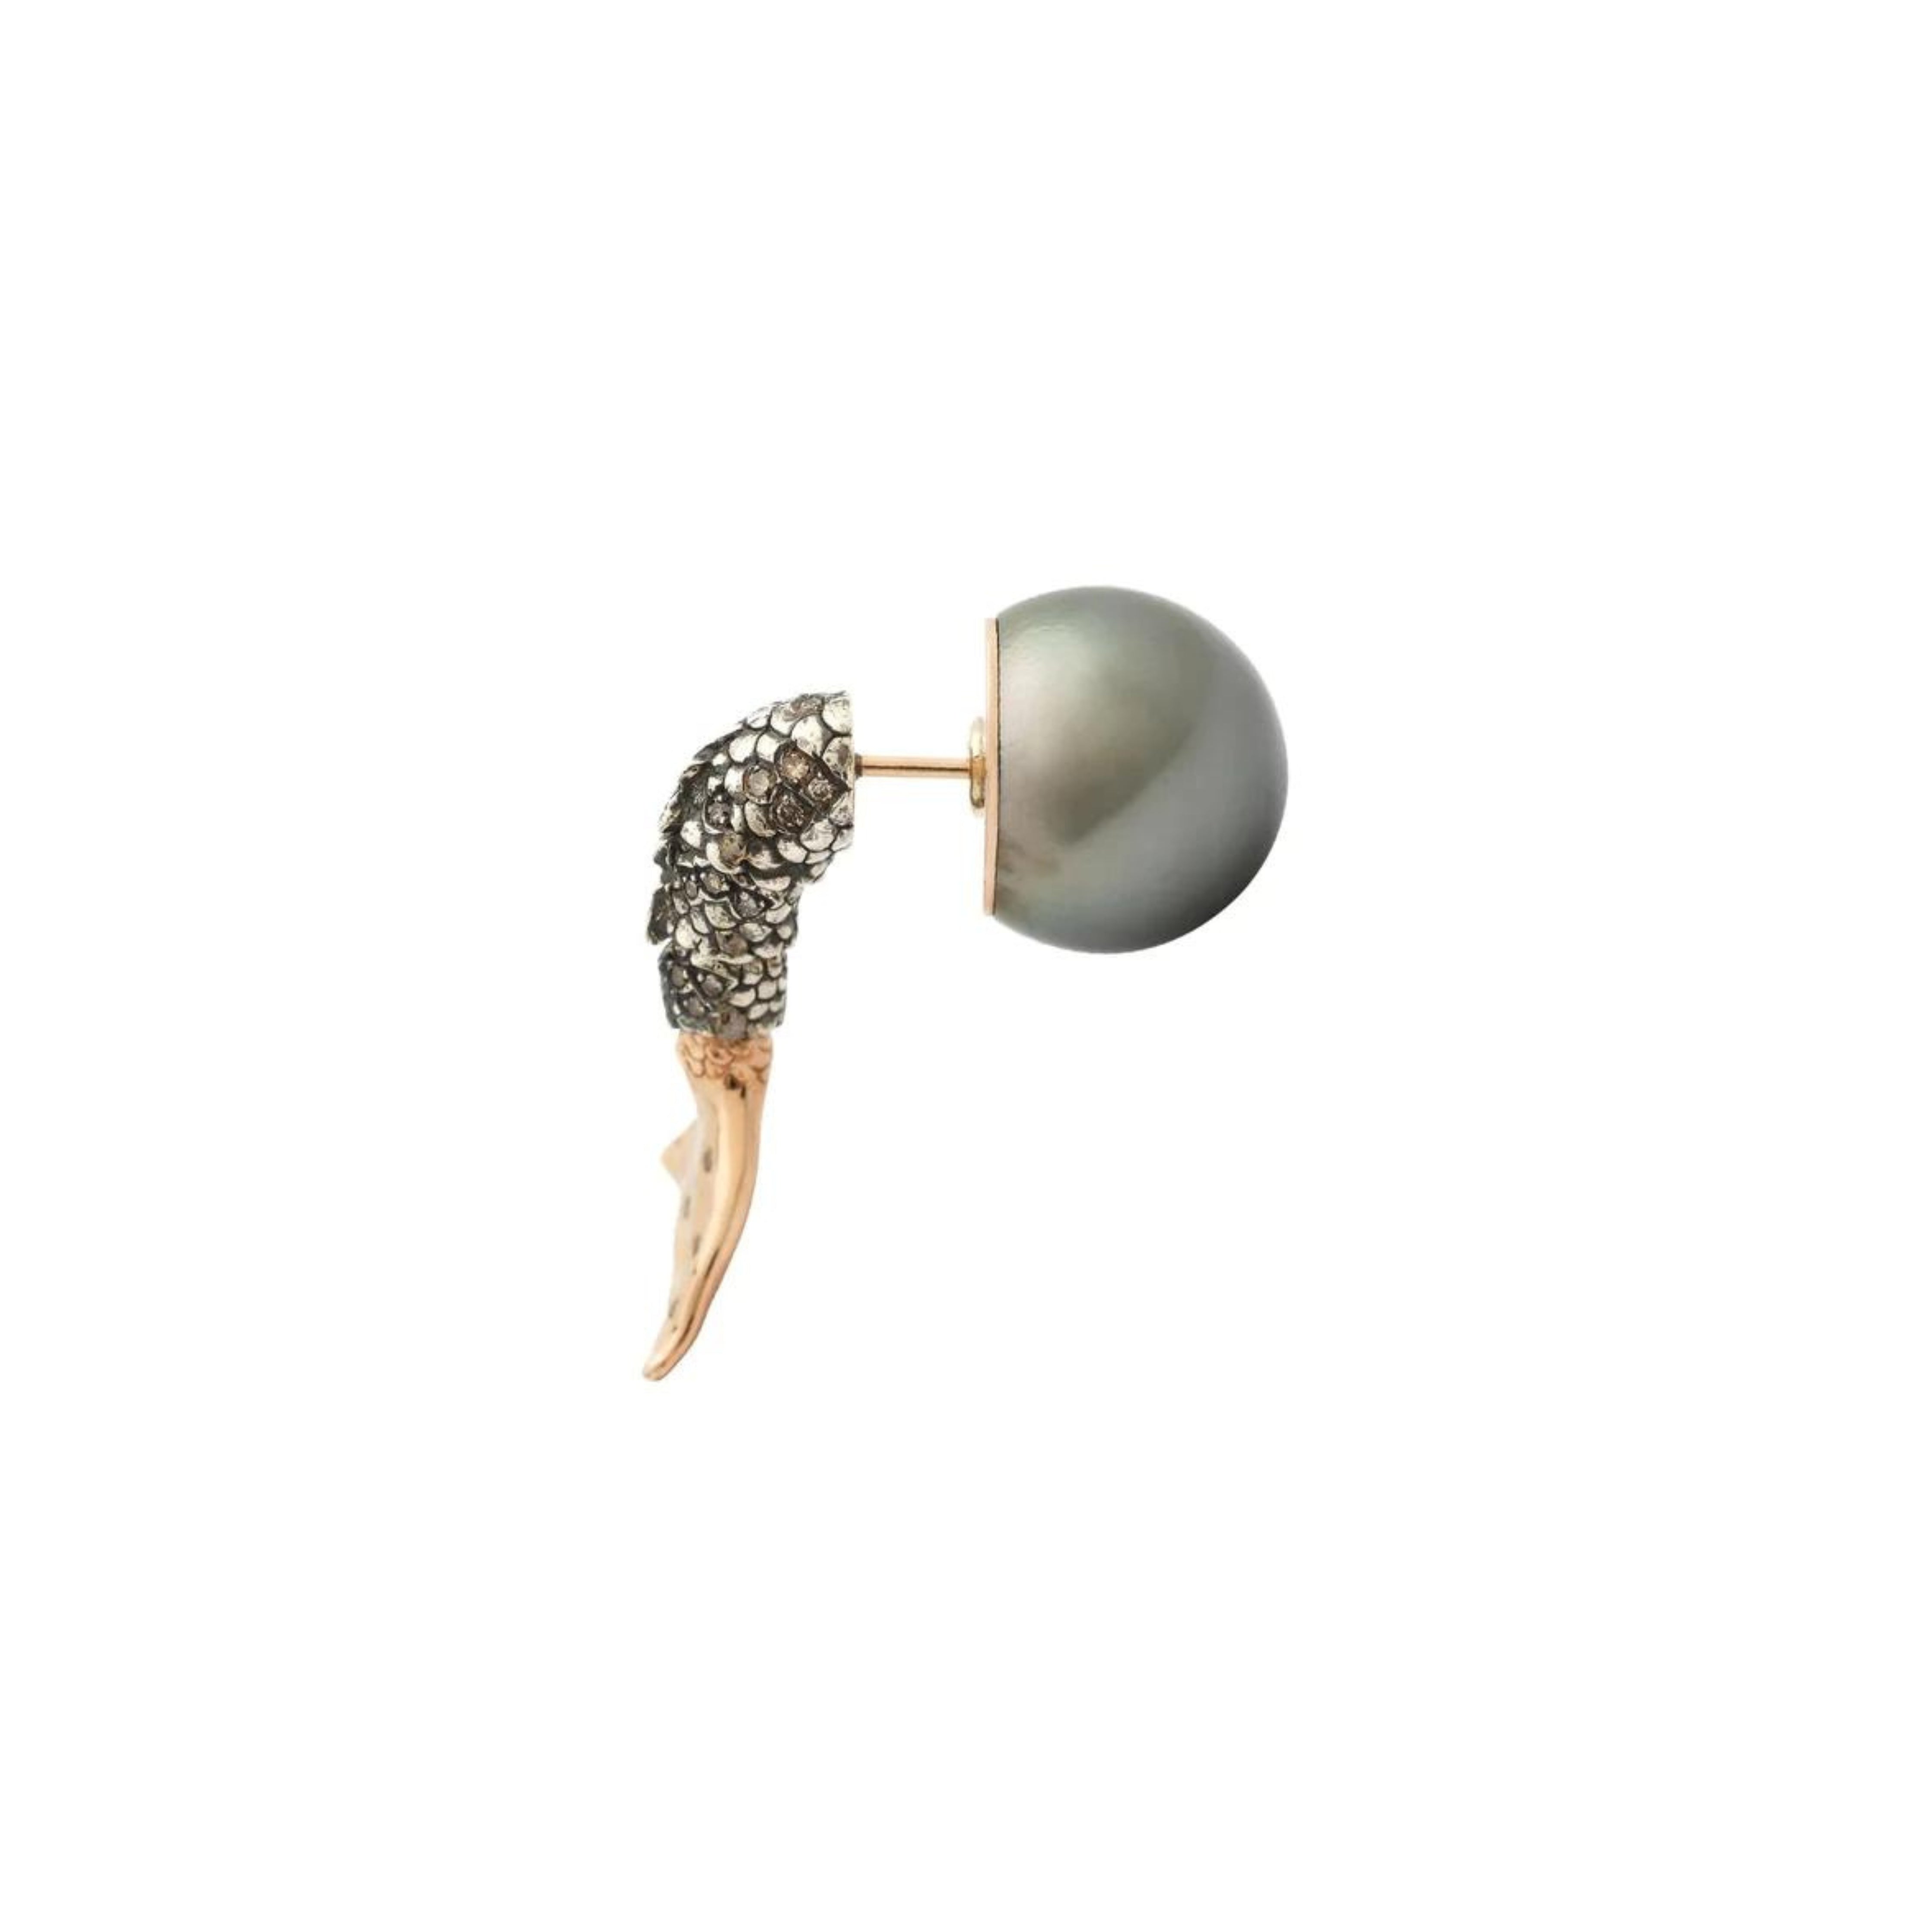 Bibi van der Velden Mermaid Pearl Earring. Made in 18K rose gold and sterling silver with a deep blue pearl and brown diamonds. Featuring a moving mermaid's tail with moving scales and gold fin. Shown from the side.